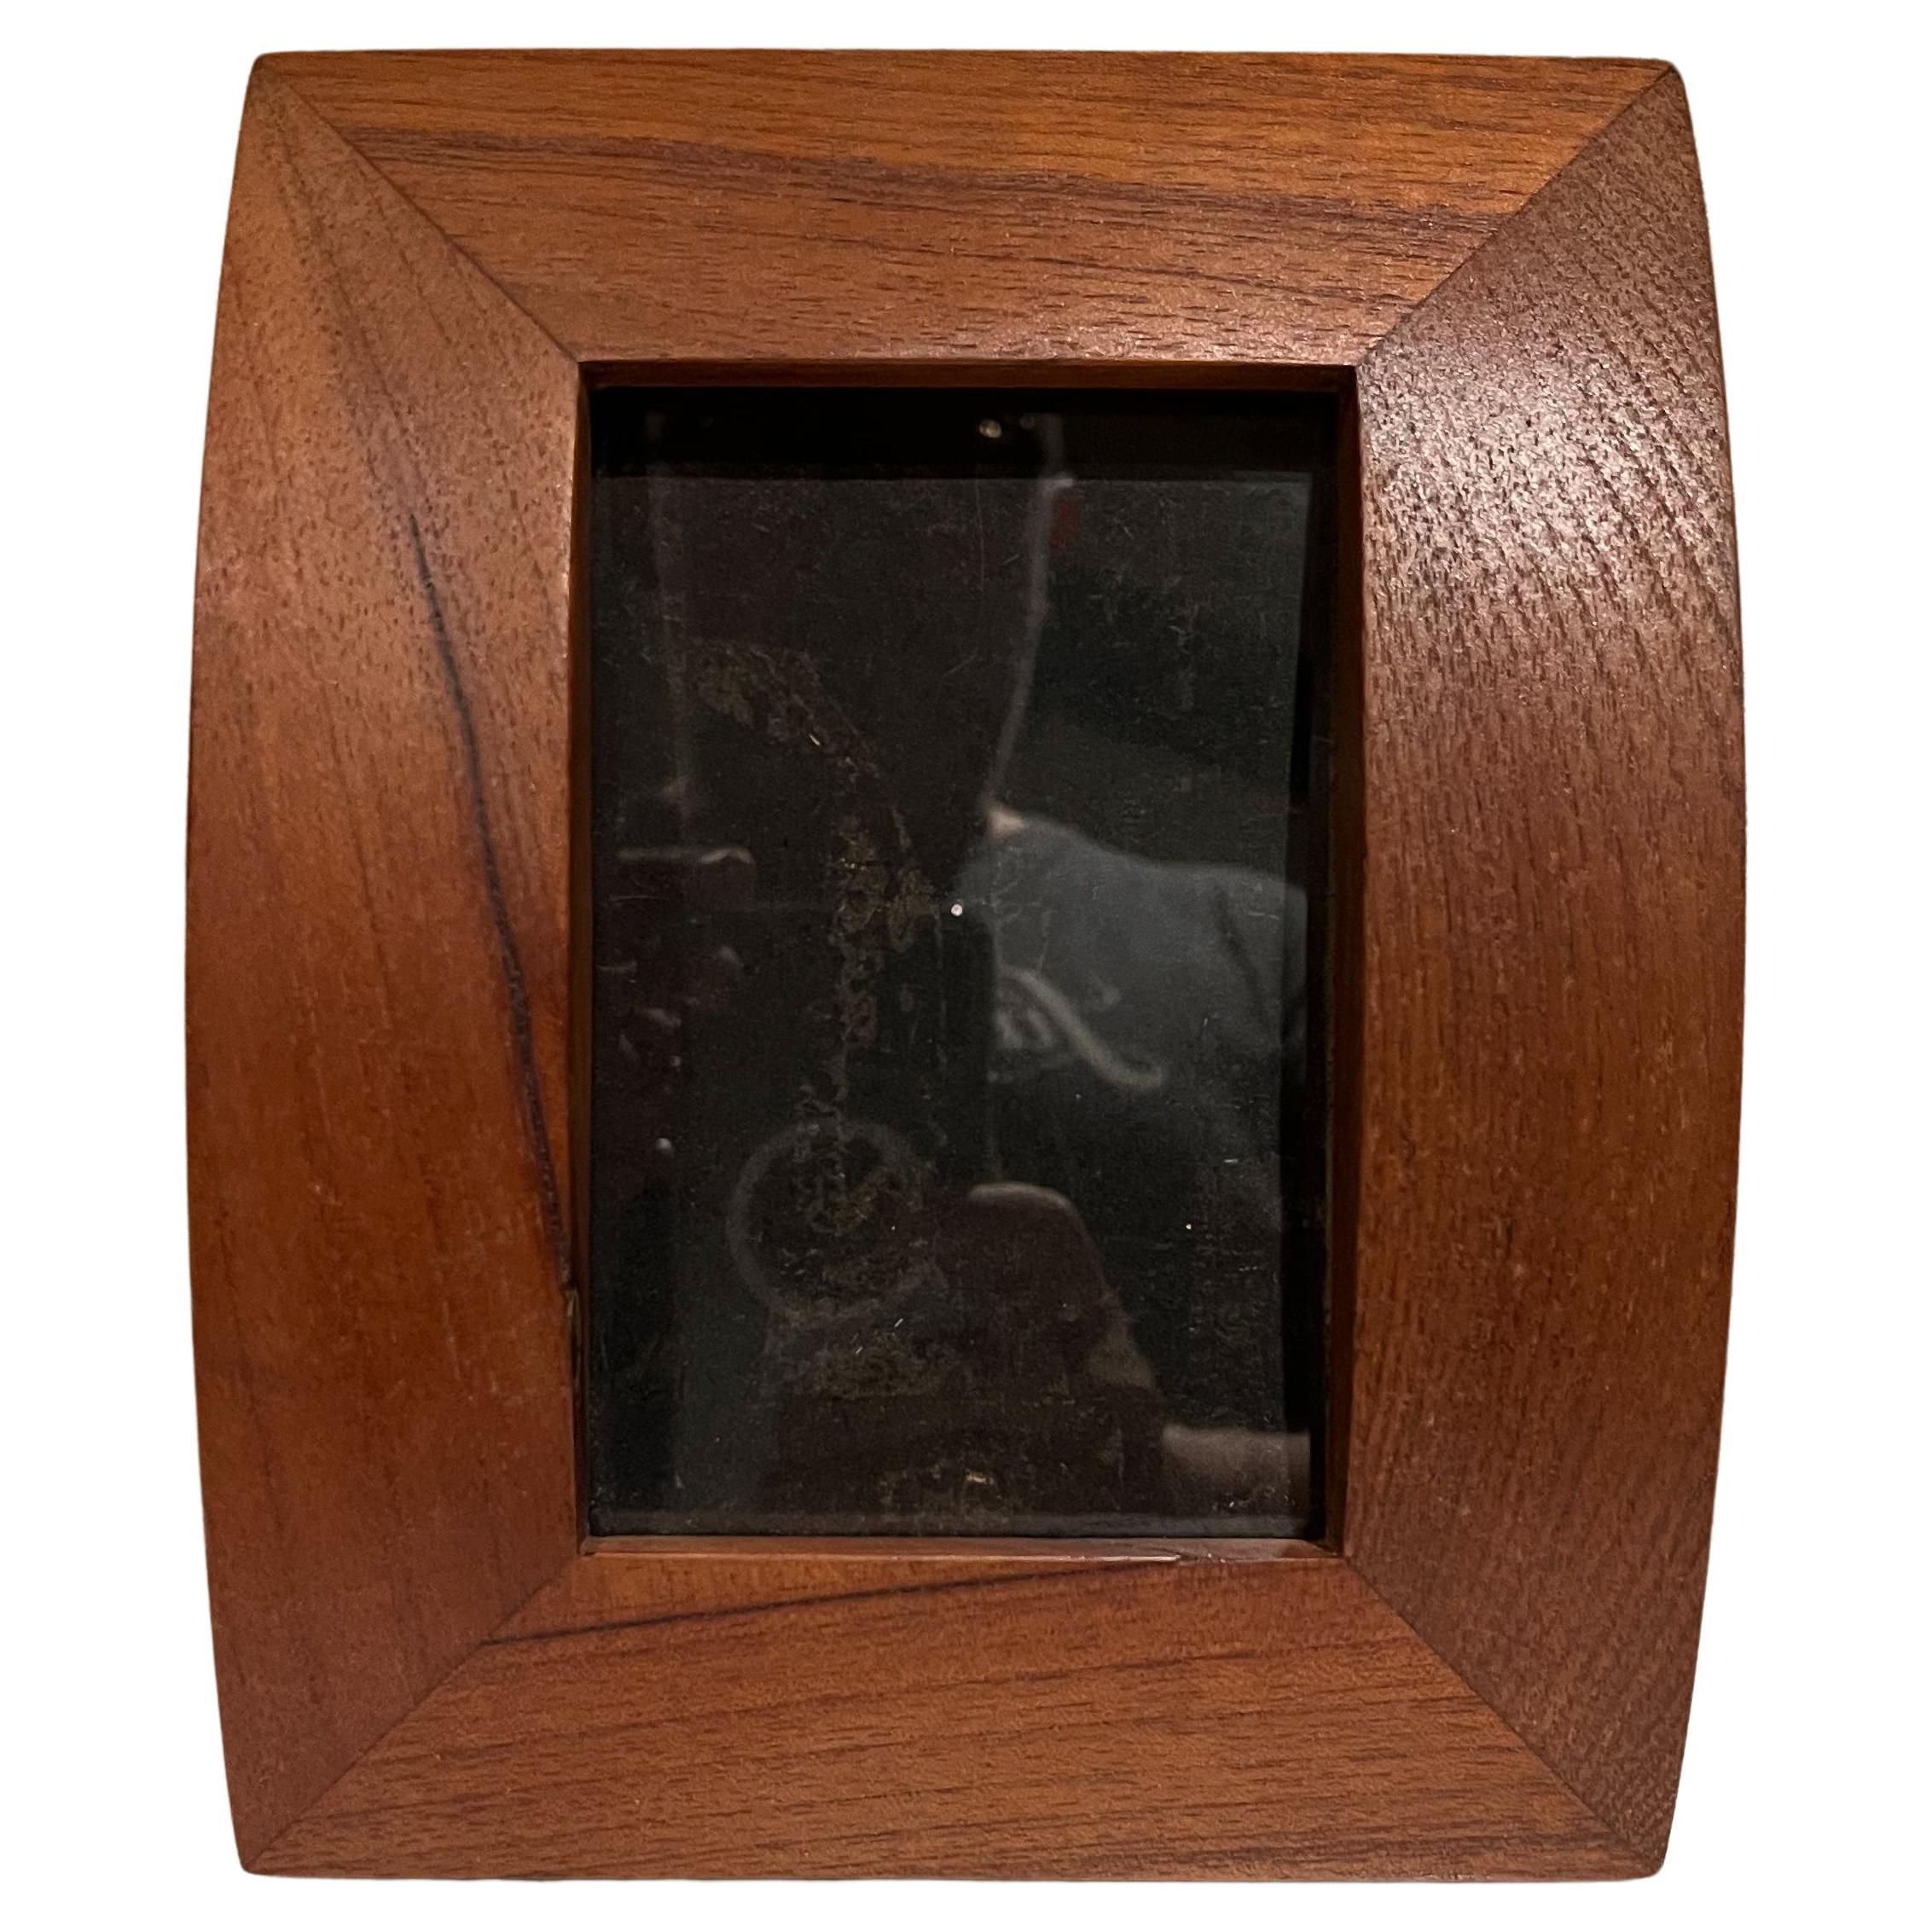 Excellent Mexican Modernism in a curved mahogany wood picture frame.
For tabletop desk display comes with support stand.
Measures: 9.13 tall x 7.13 wide x 1.75.
Original unrestored preowned vintage condition.
See our images provided please.